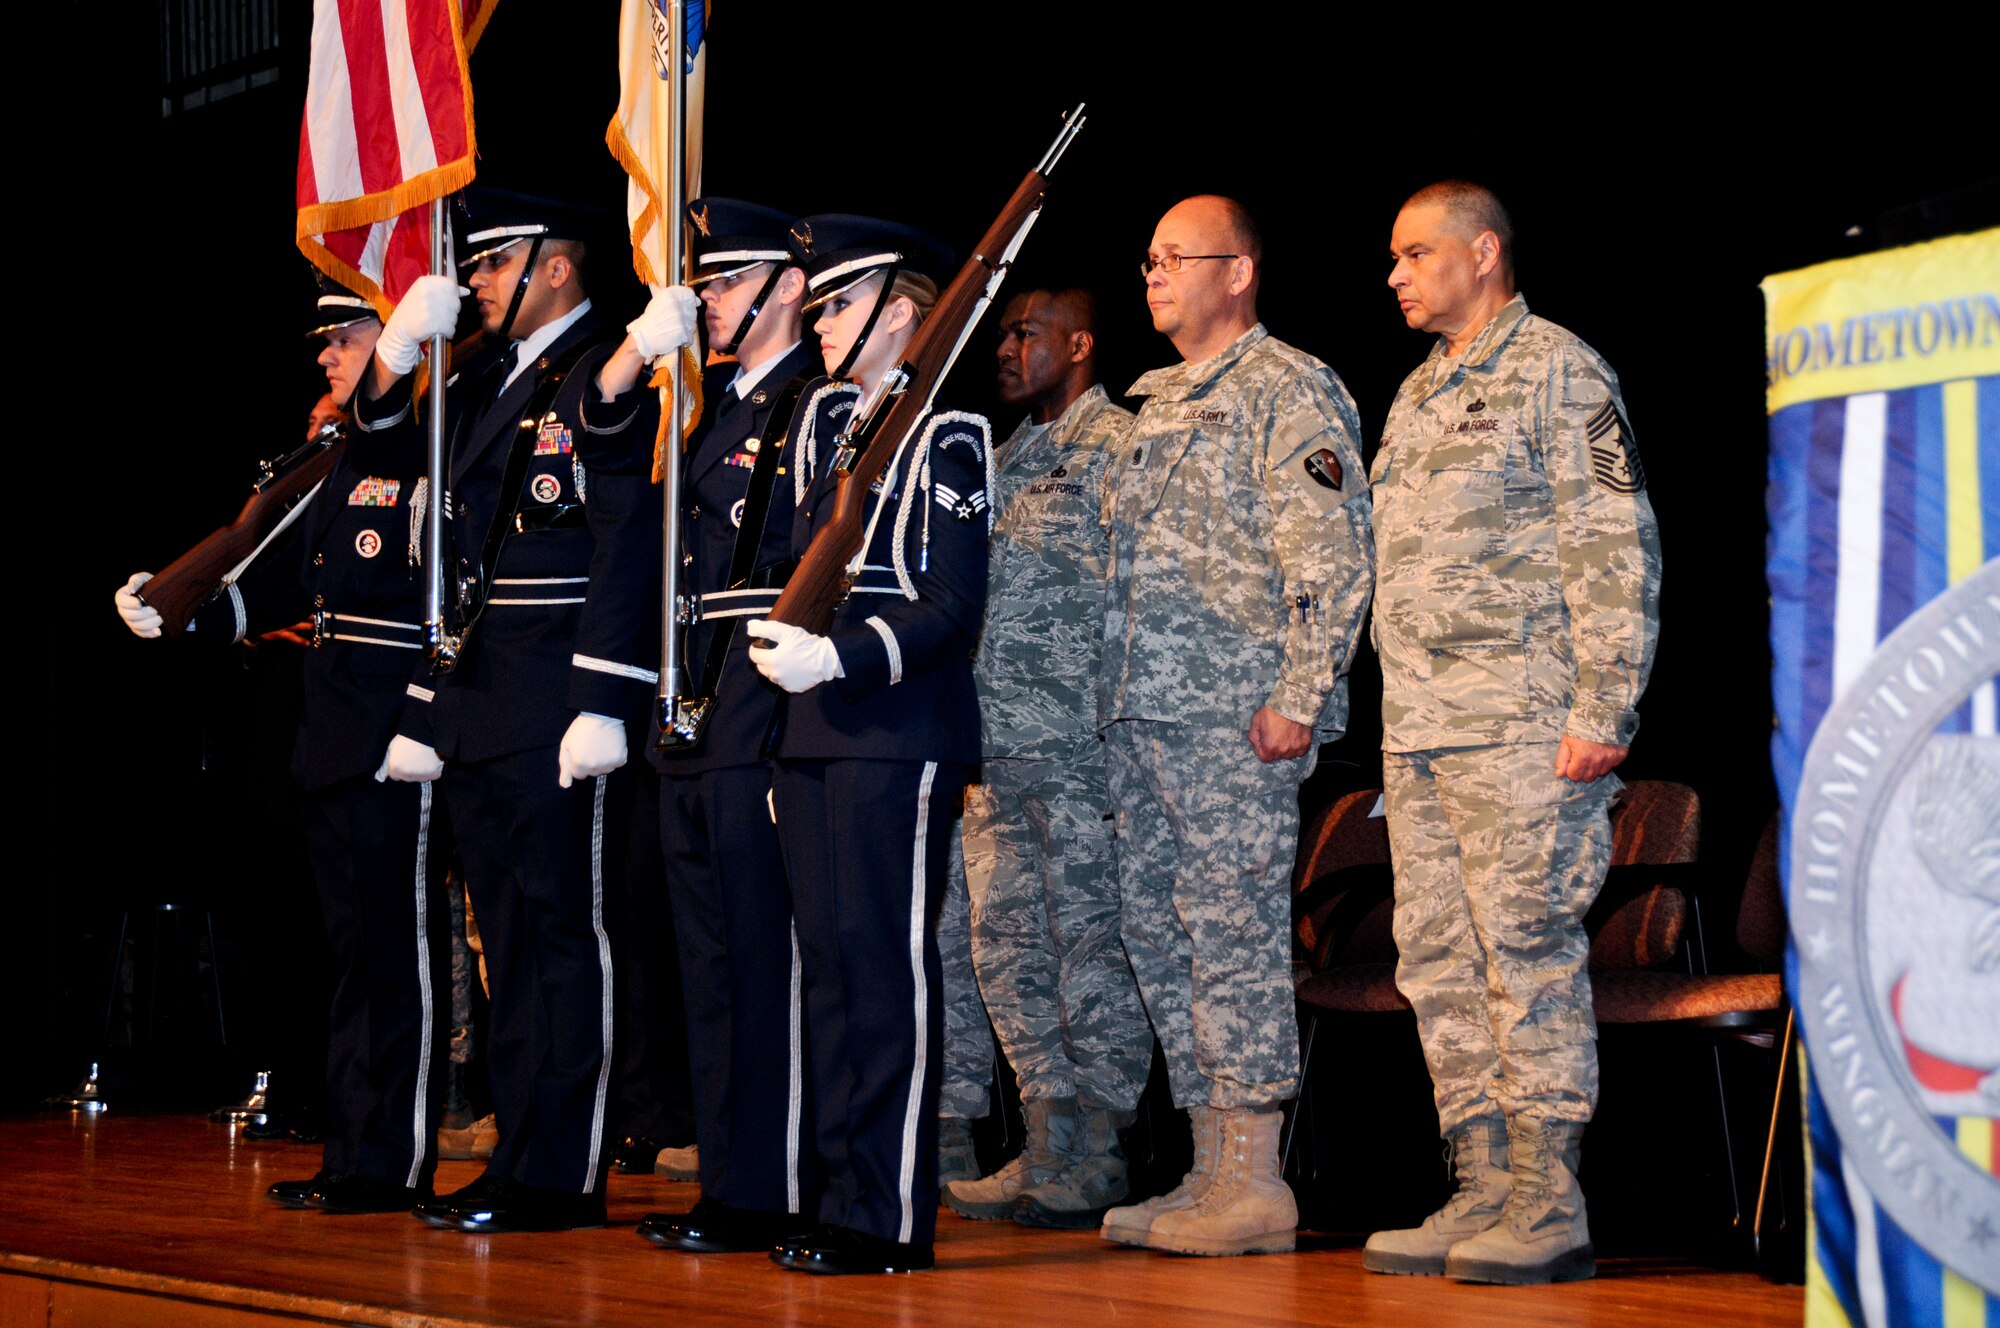 U.S. Air Force airmen from the New Jersey Air National Guard's 177th Fighter Wing Honor Guard place the colors at the beginning of the Hometown Heroes Salute awards presentation at Absegami High School in Galloway, N.J. on Feb. 9.  (U.S. Air National Guard photo by Airman 1st Class Shane Karp/Released)